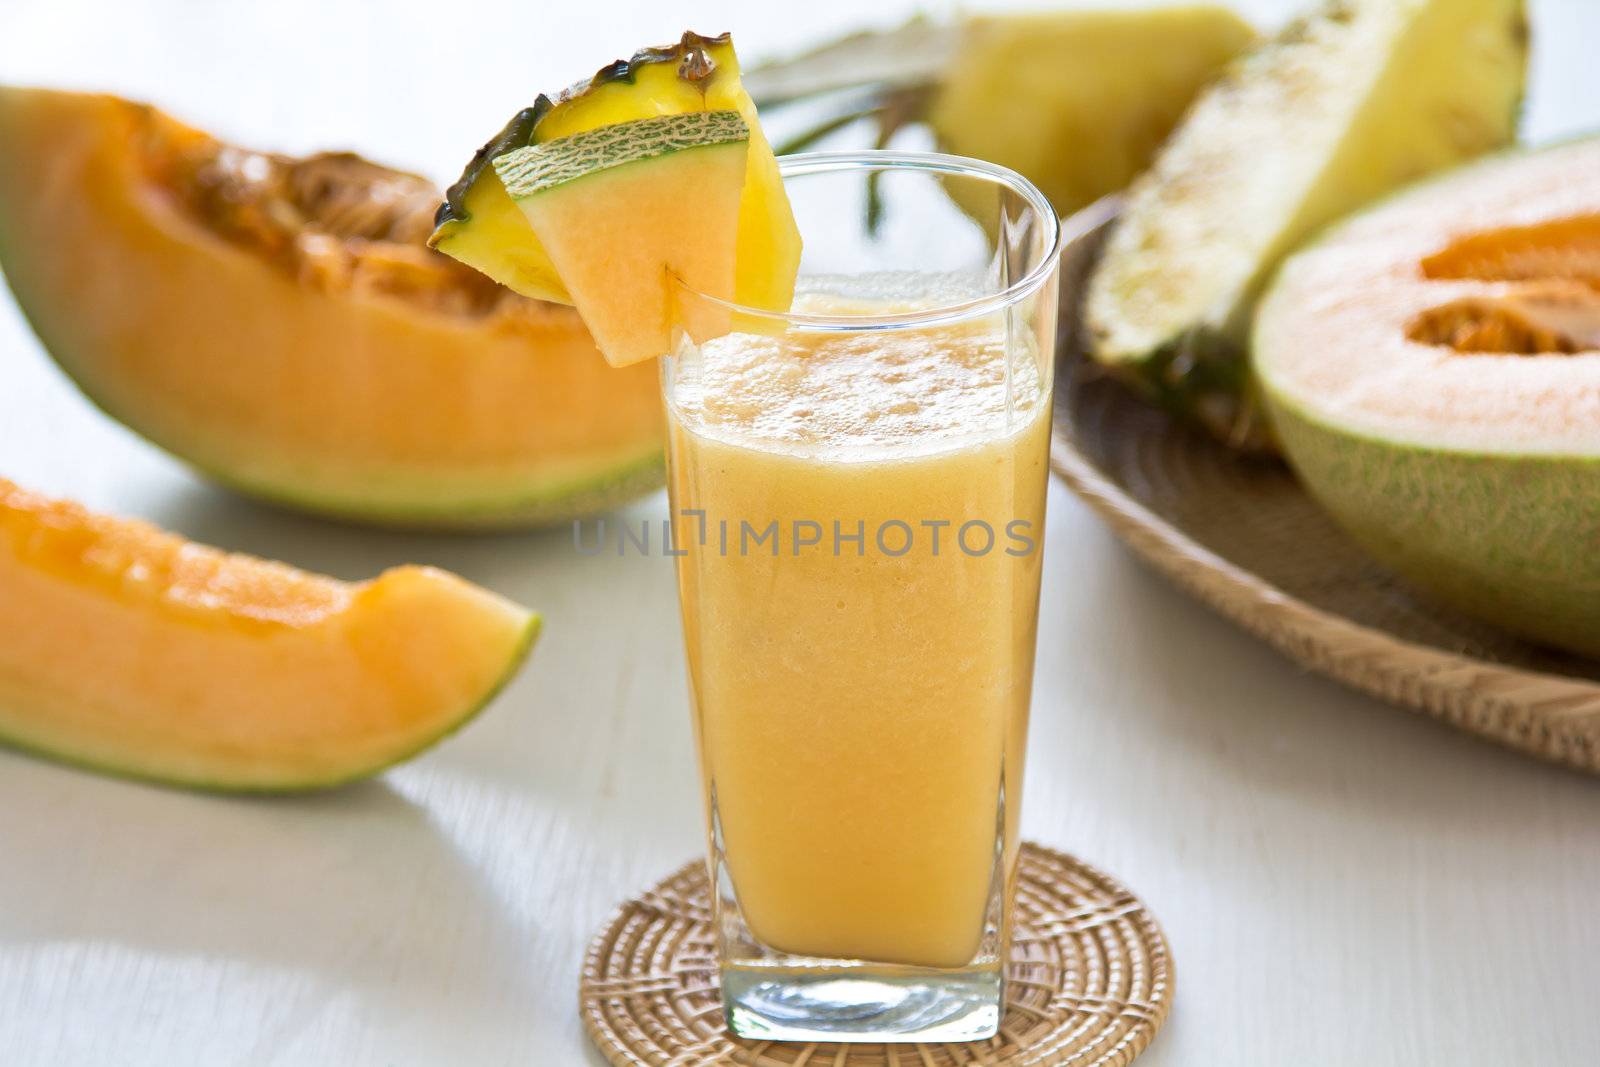 Cantaloupe and Pineapple smoothie by vanillaechoes